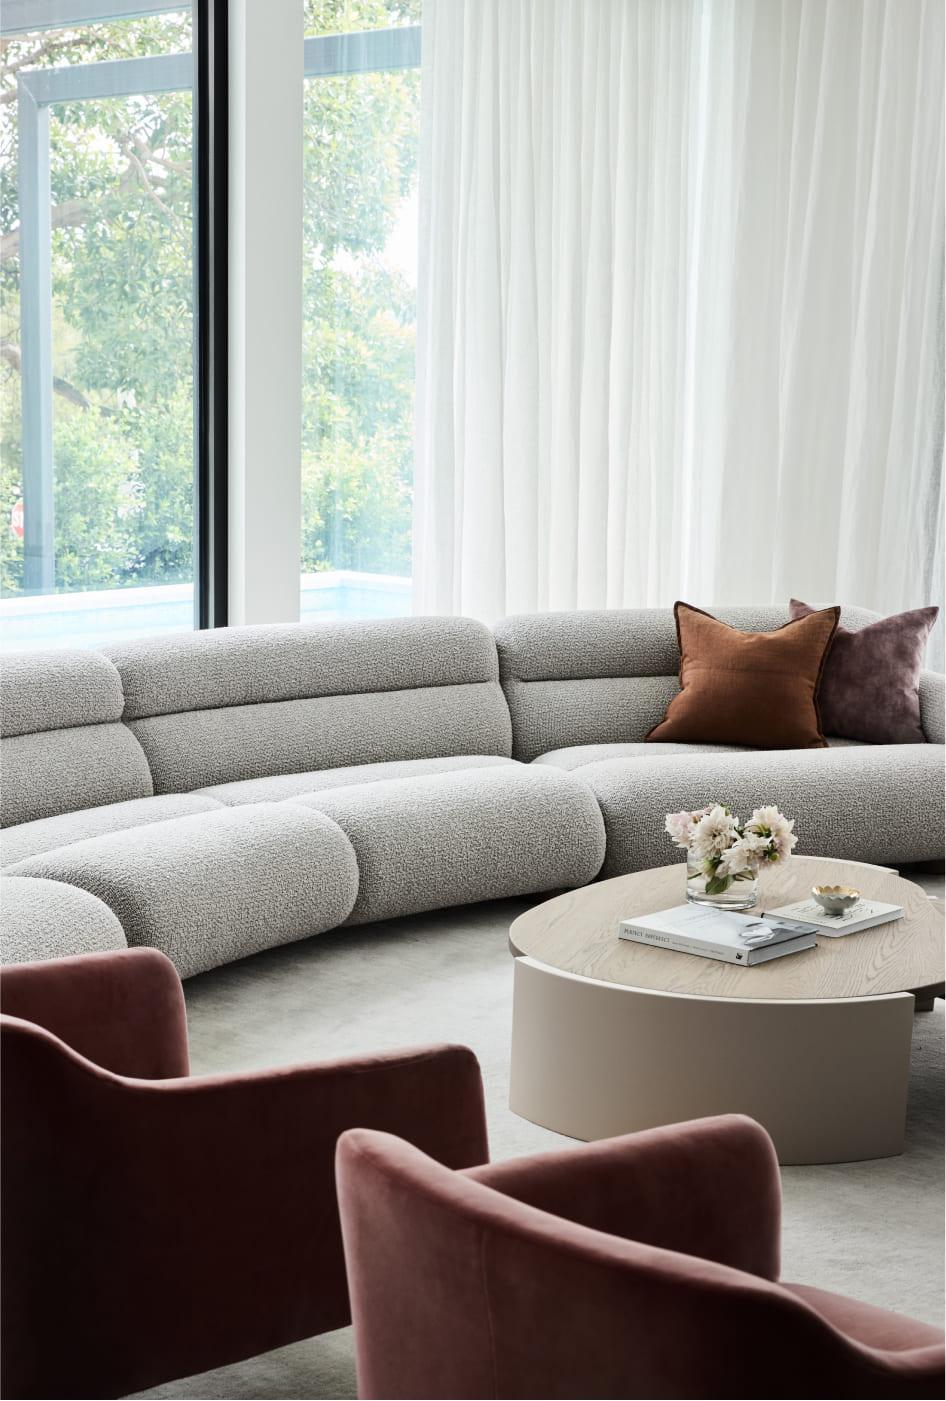 A curved couch in the living area with floor to ceiling windows